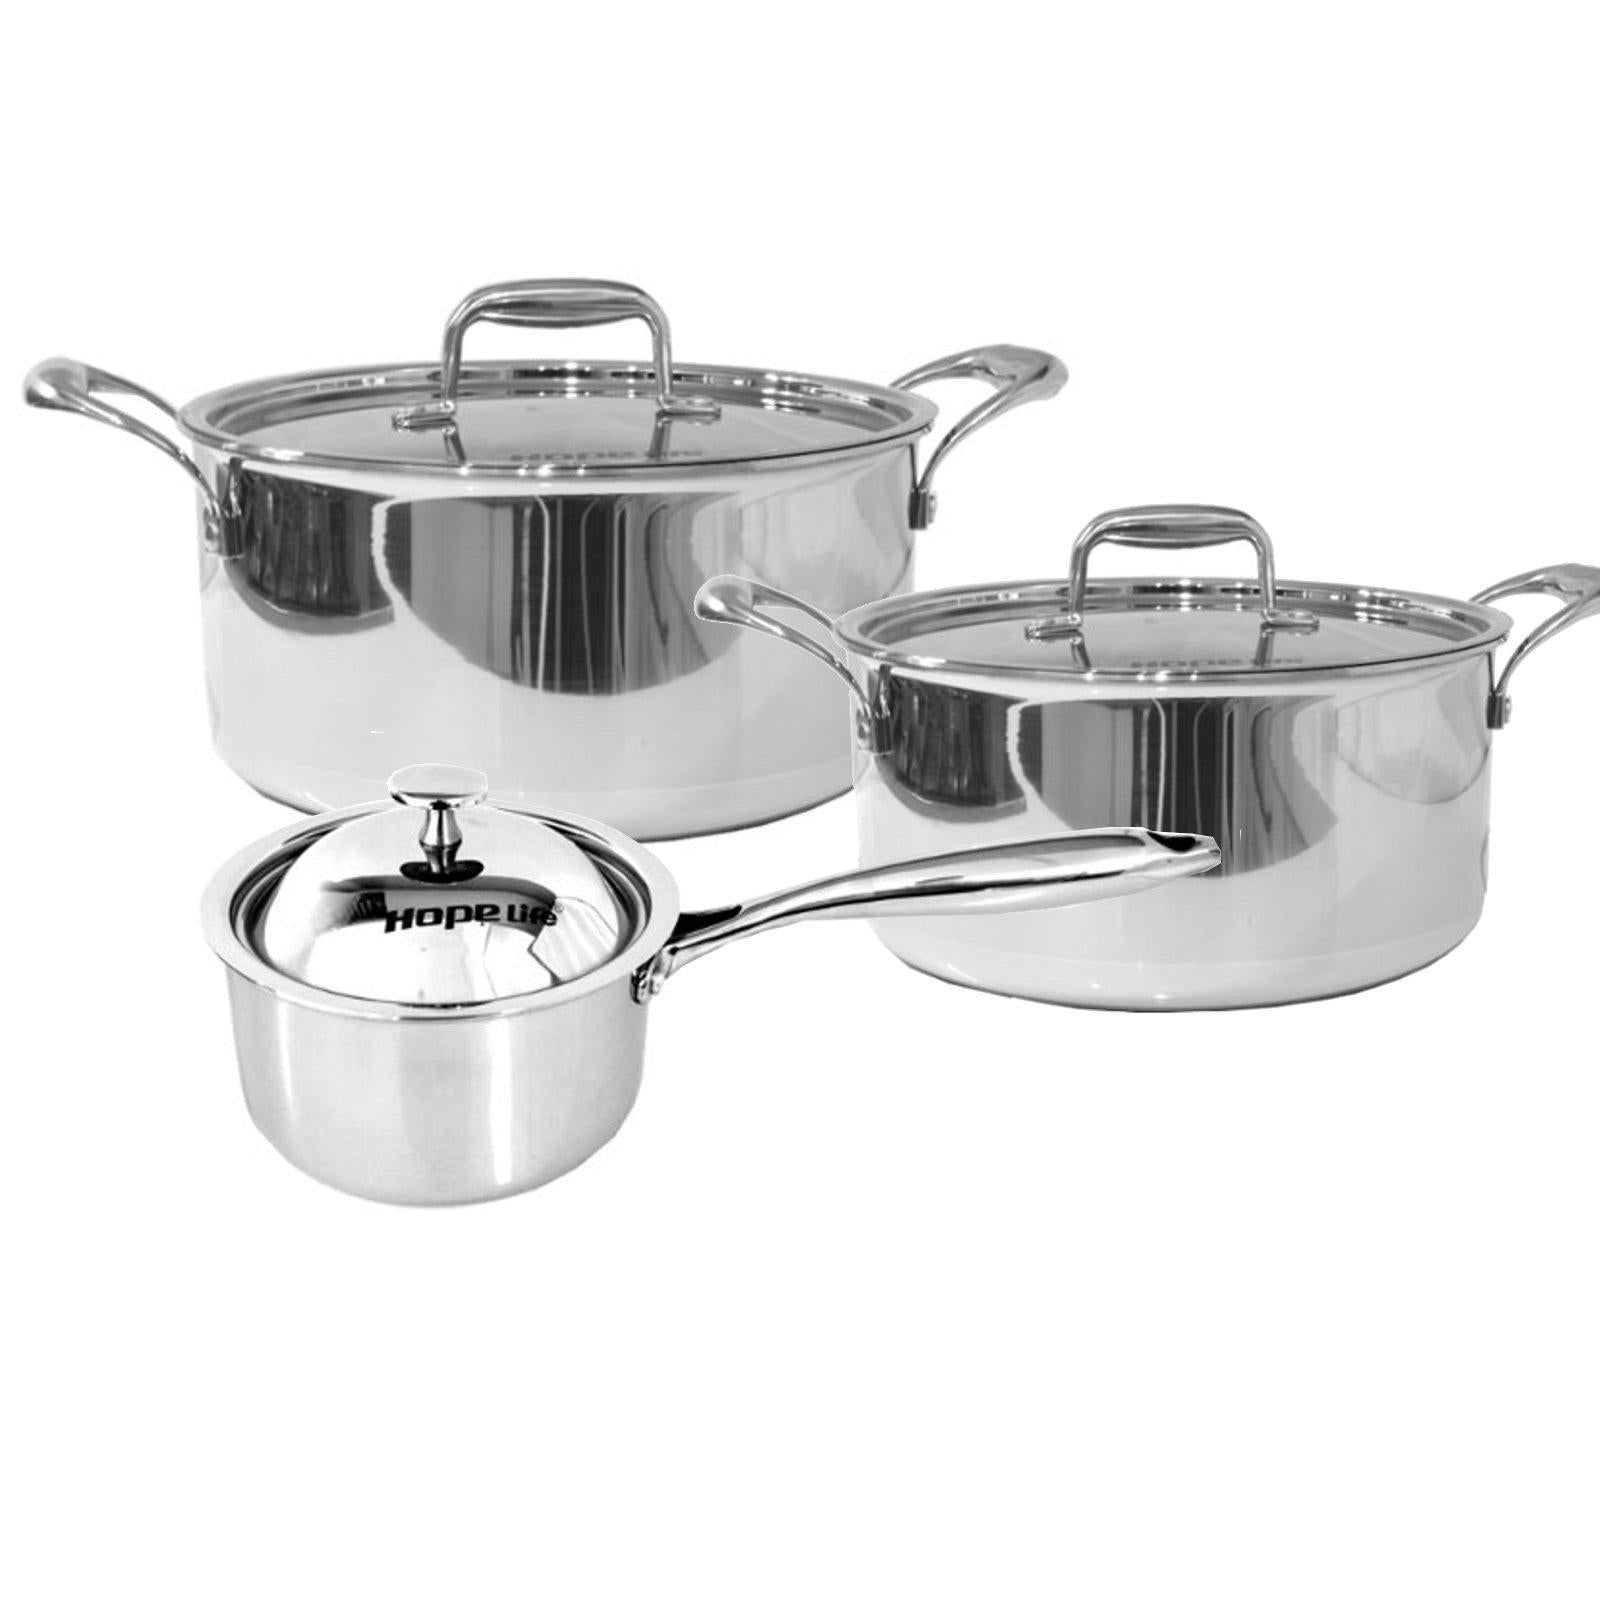 3 Pcs Stainless Steel Tri-Ply Casserole & Saucepan Set-Stainless Steel Cookware Set-Chef's Quality Cookware